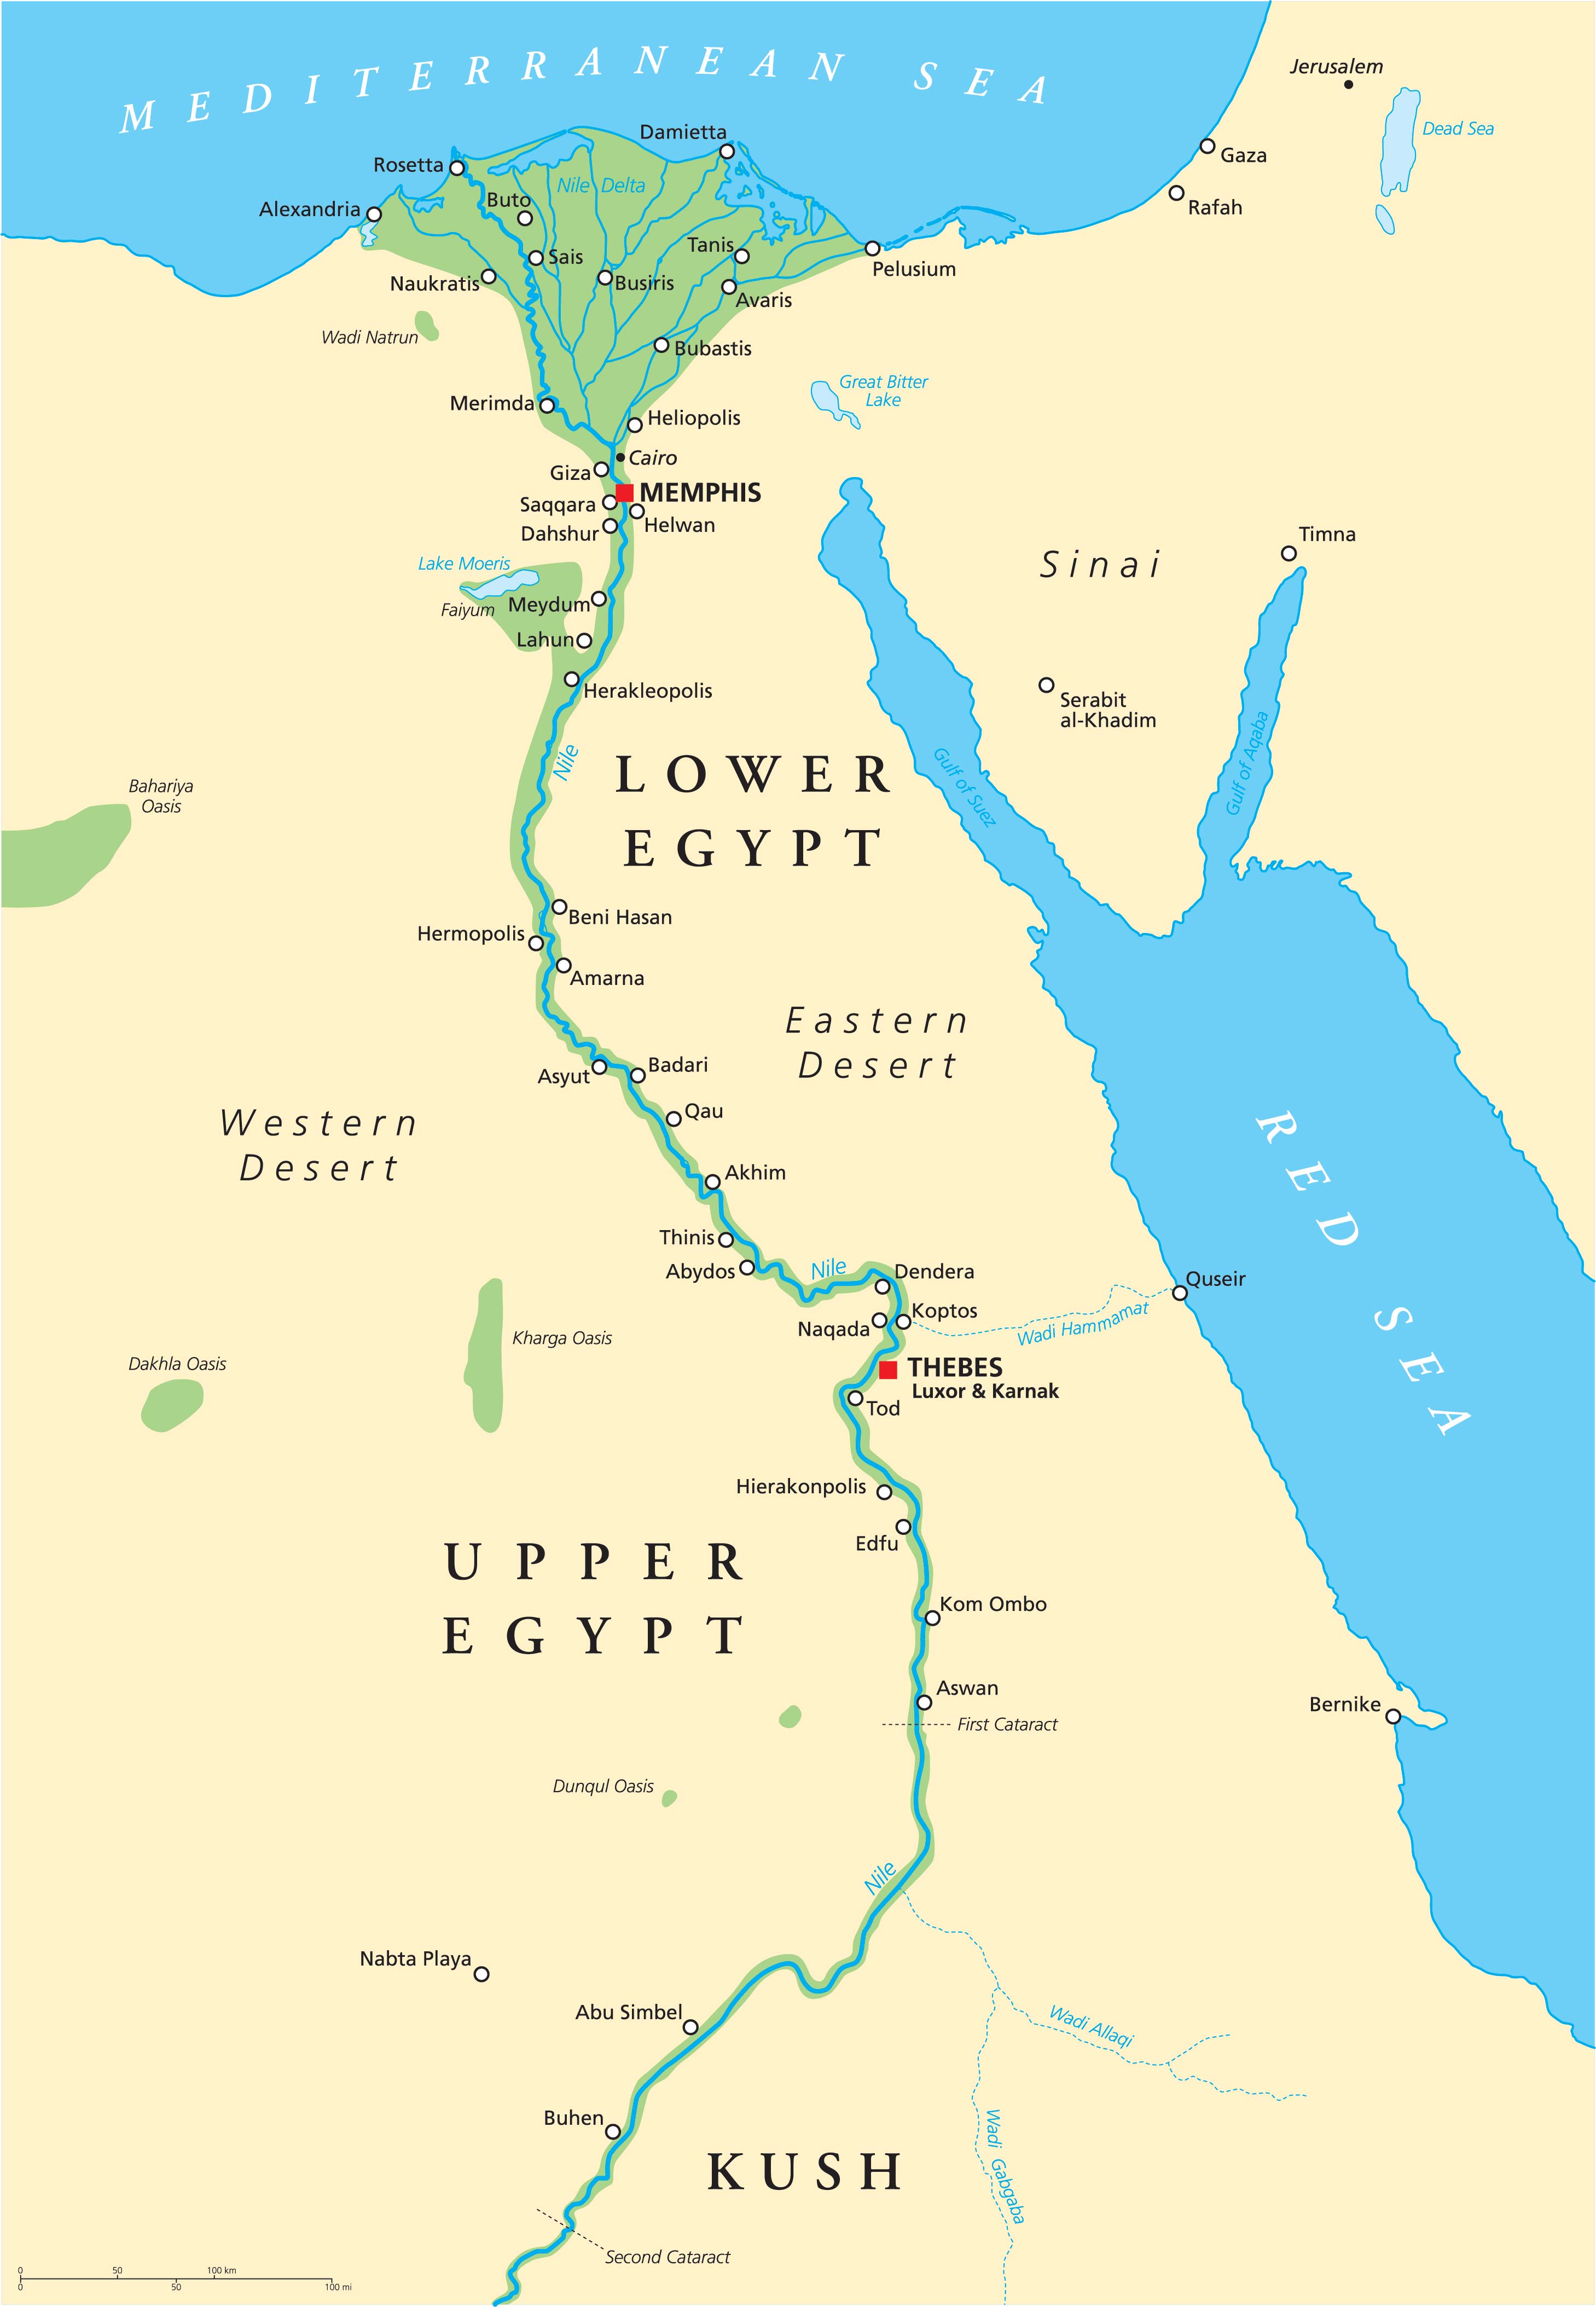 A Cool Map Of Sites On The Nile River In Egypt - vrogue.co